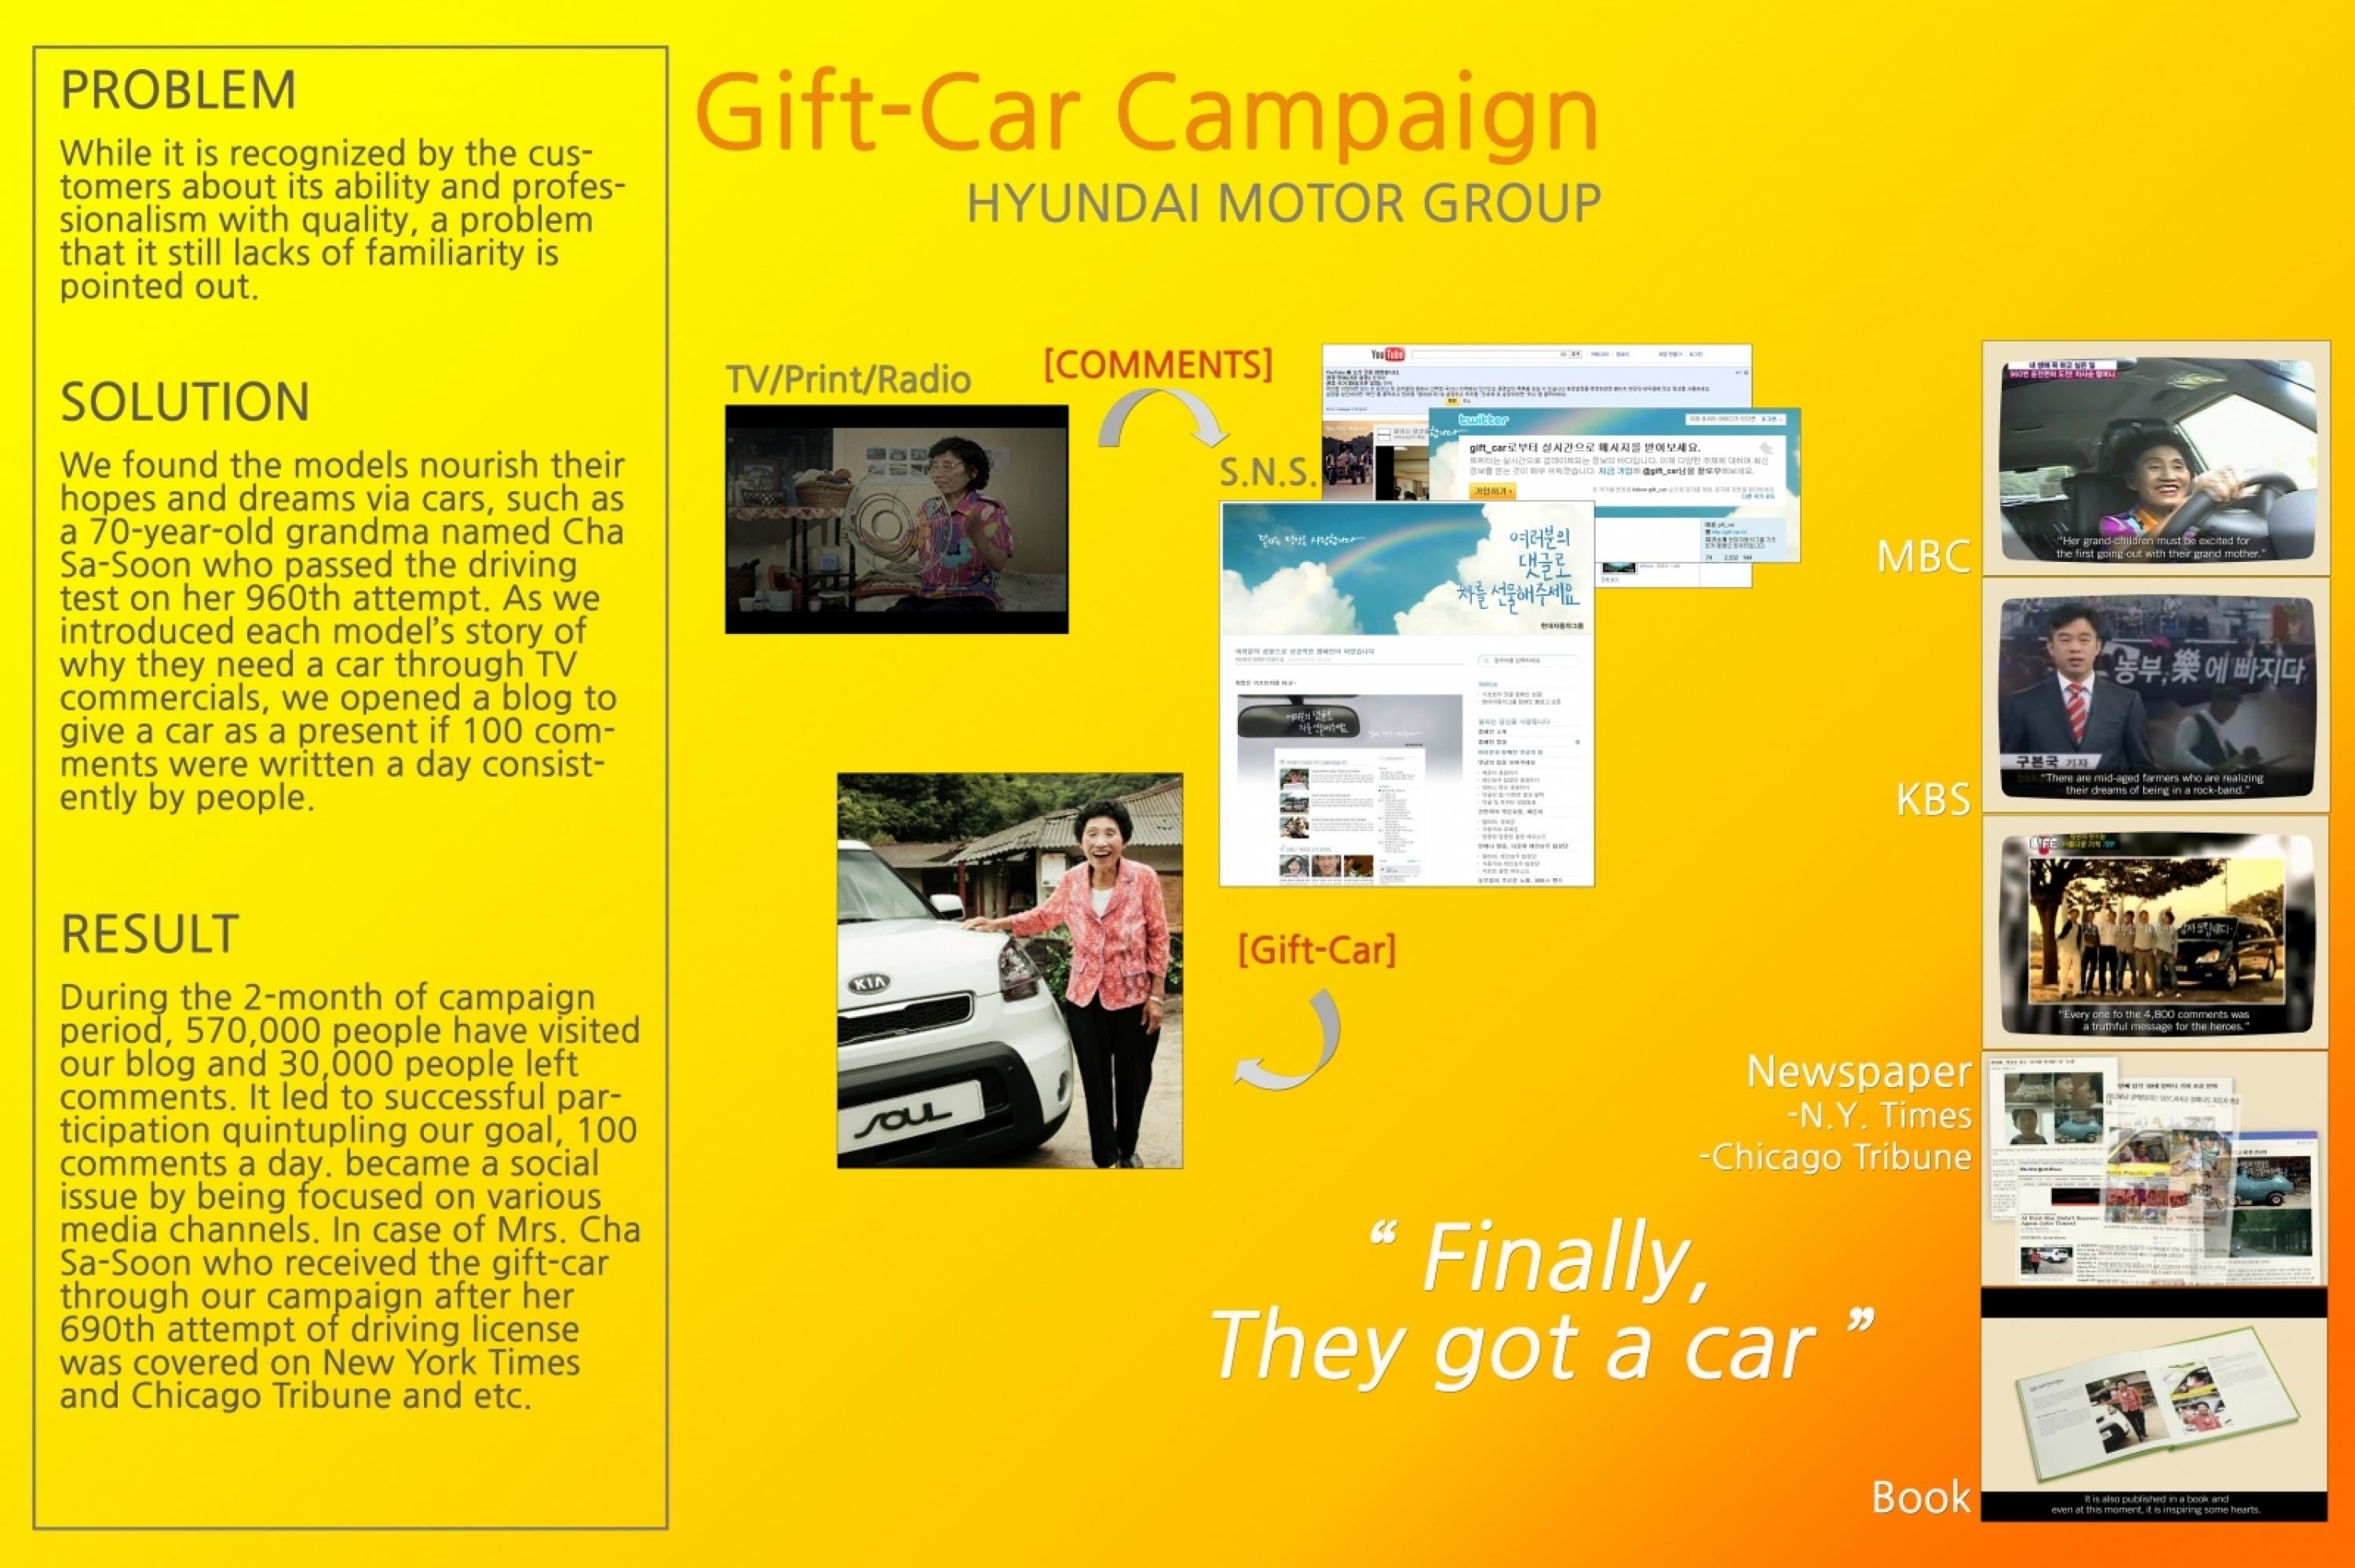 GIFT CAR CAMPAIGN